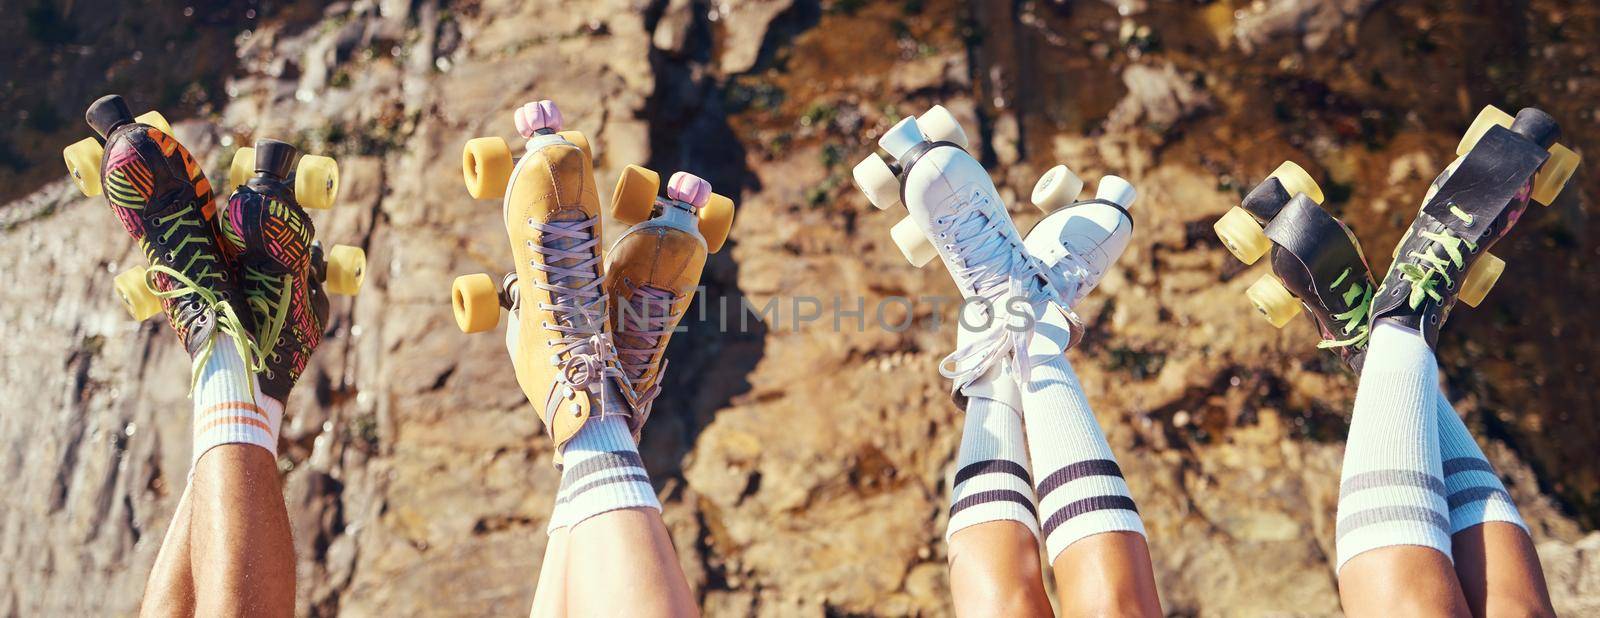 Roller skates, fun and adventure travel with friends group lifting legs and showing off retro skating footwear while outside. Group of women enjoying hobby, freedom and activity on holiday together by YuriArcurs